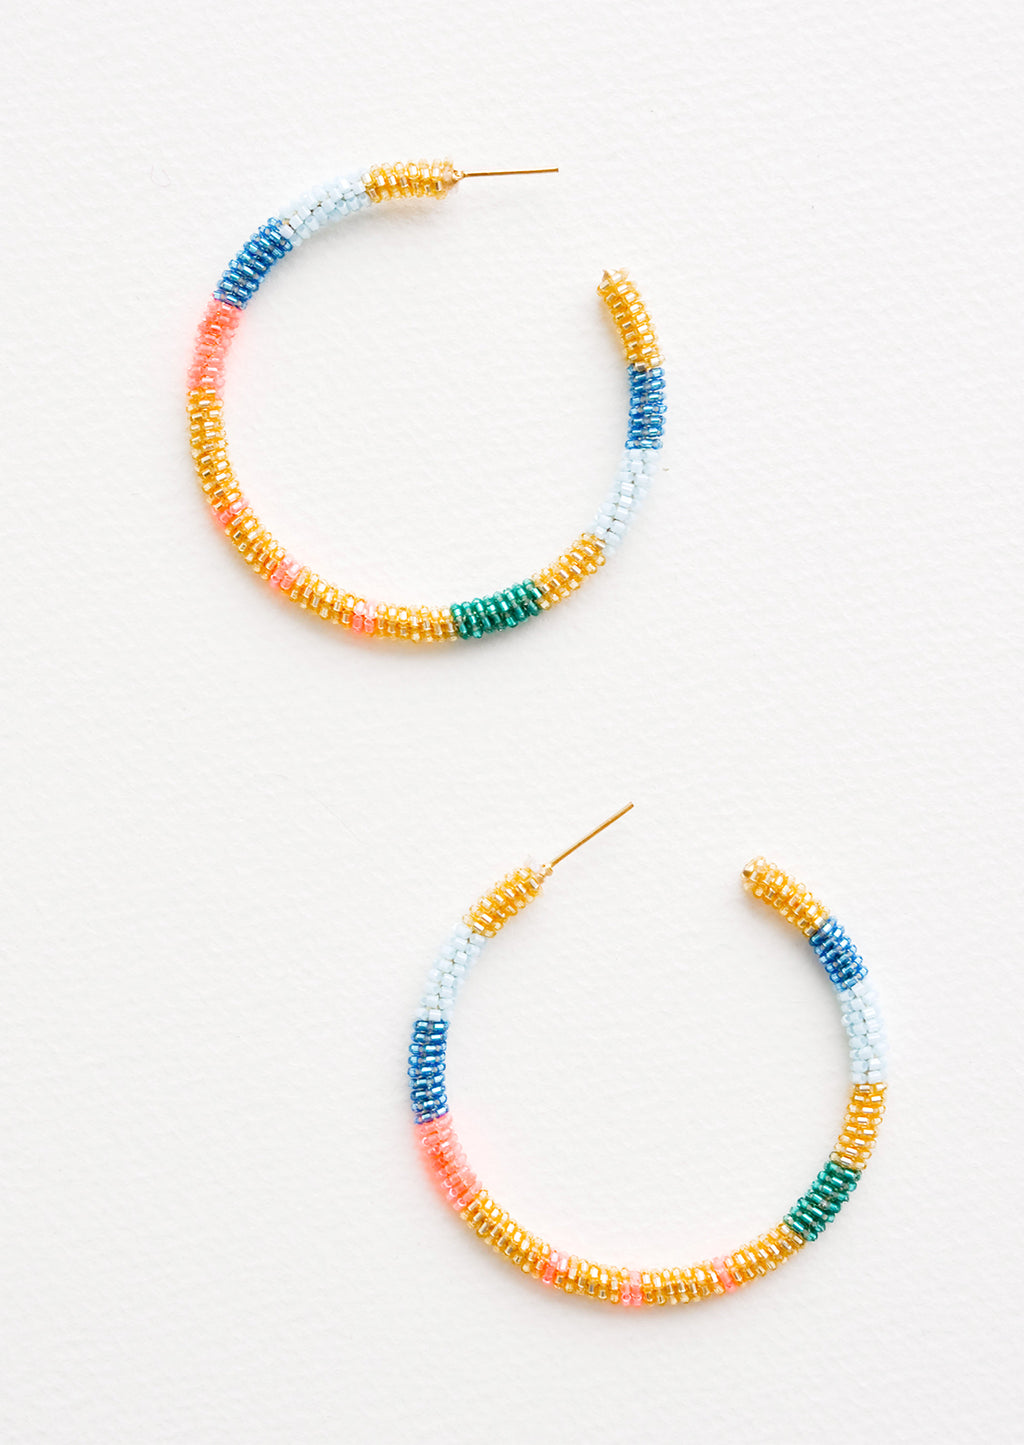 Blue / Gold Multi: Hoop earrings with blue, pink, gold and green glass beads arranged in a circle.